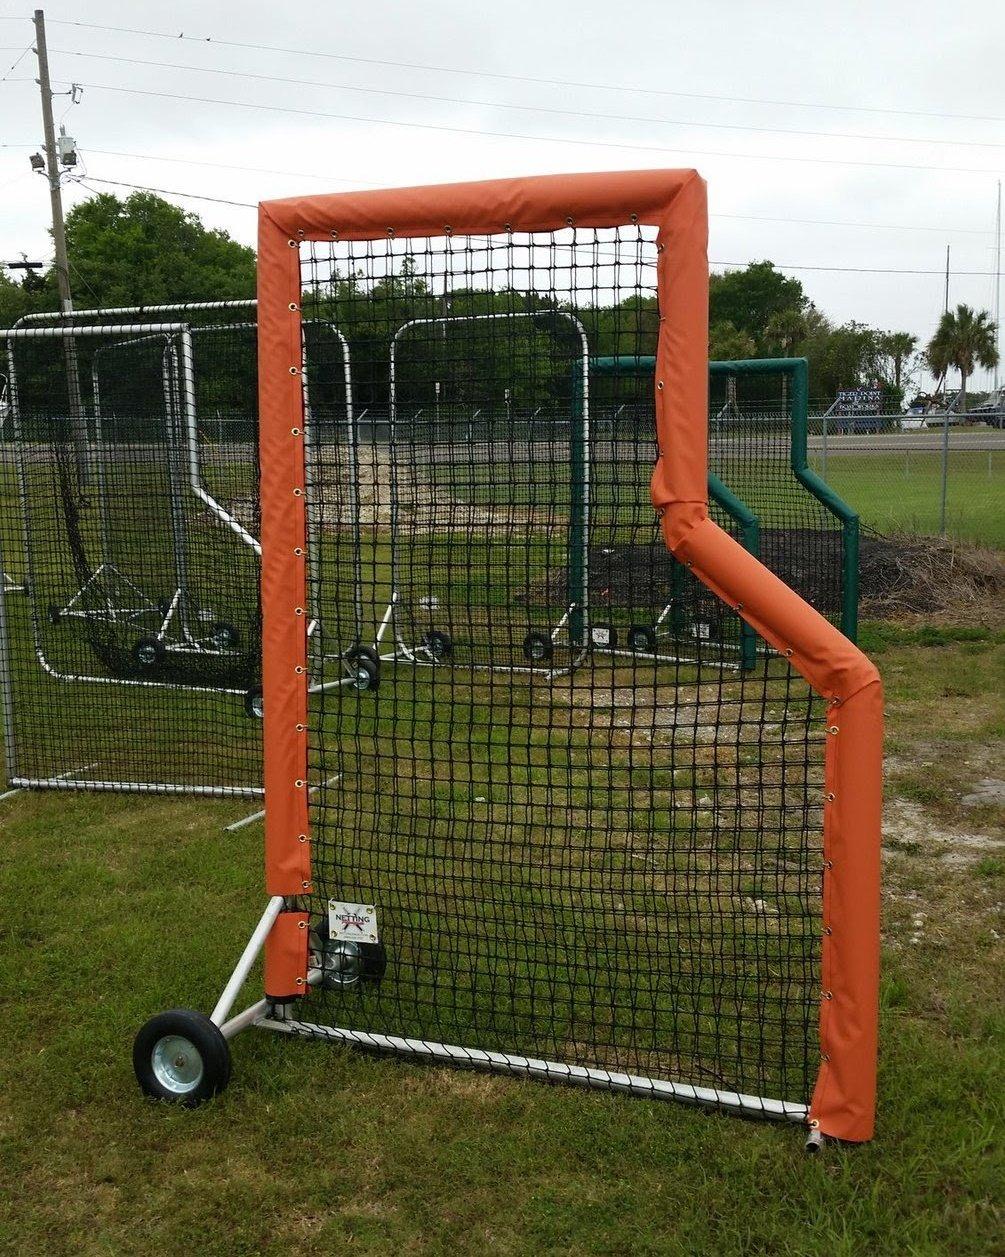 A baseball field with a batting cage and a ball cart.